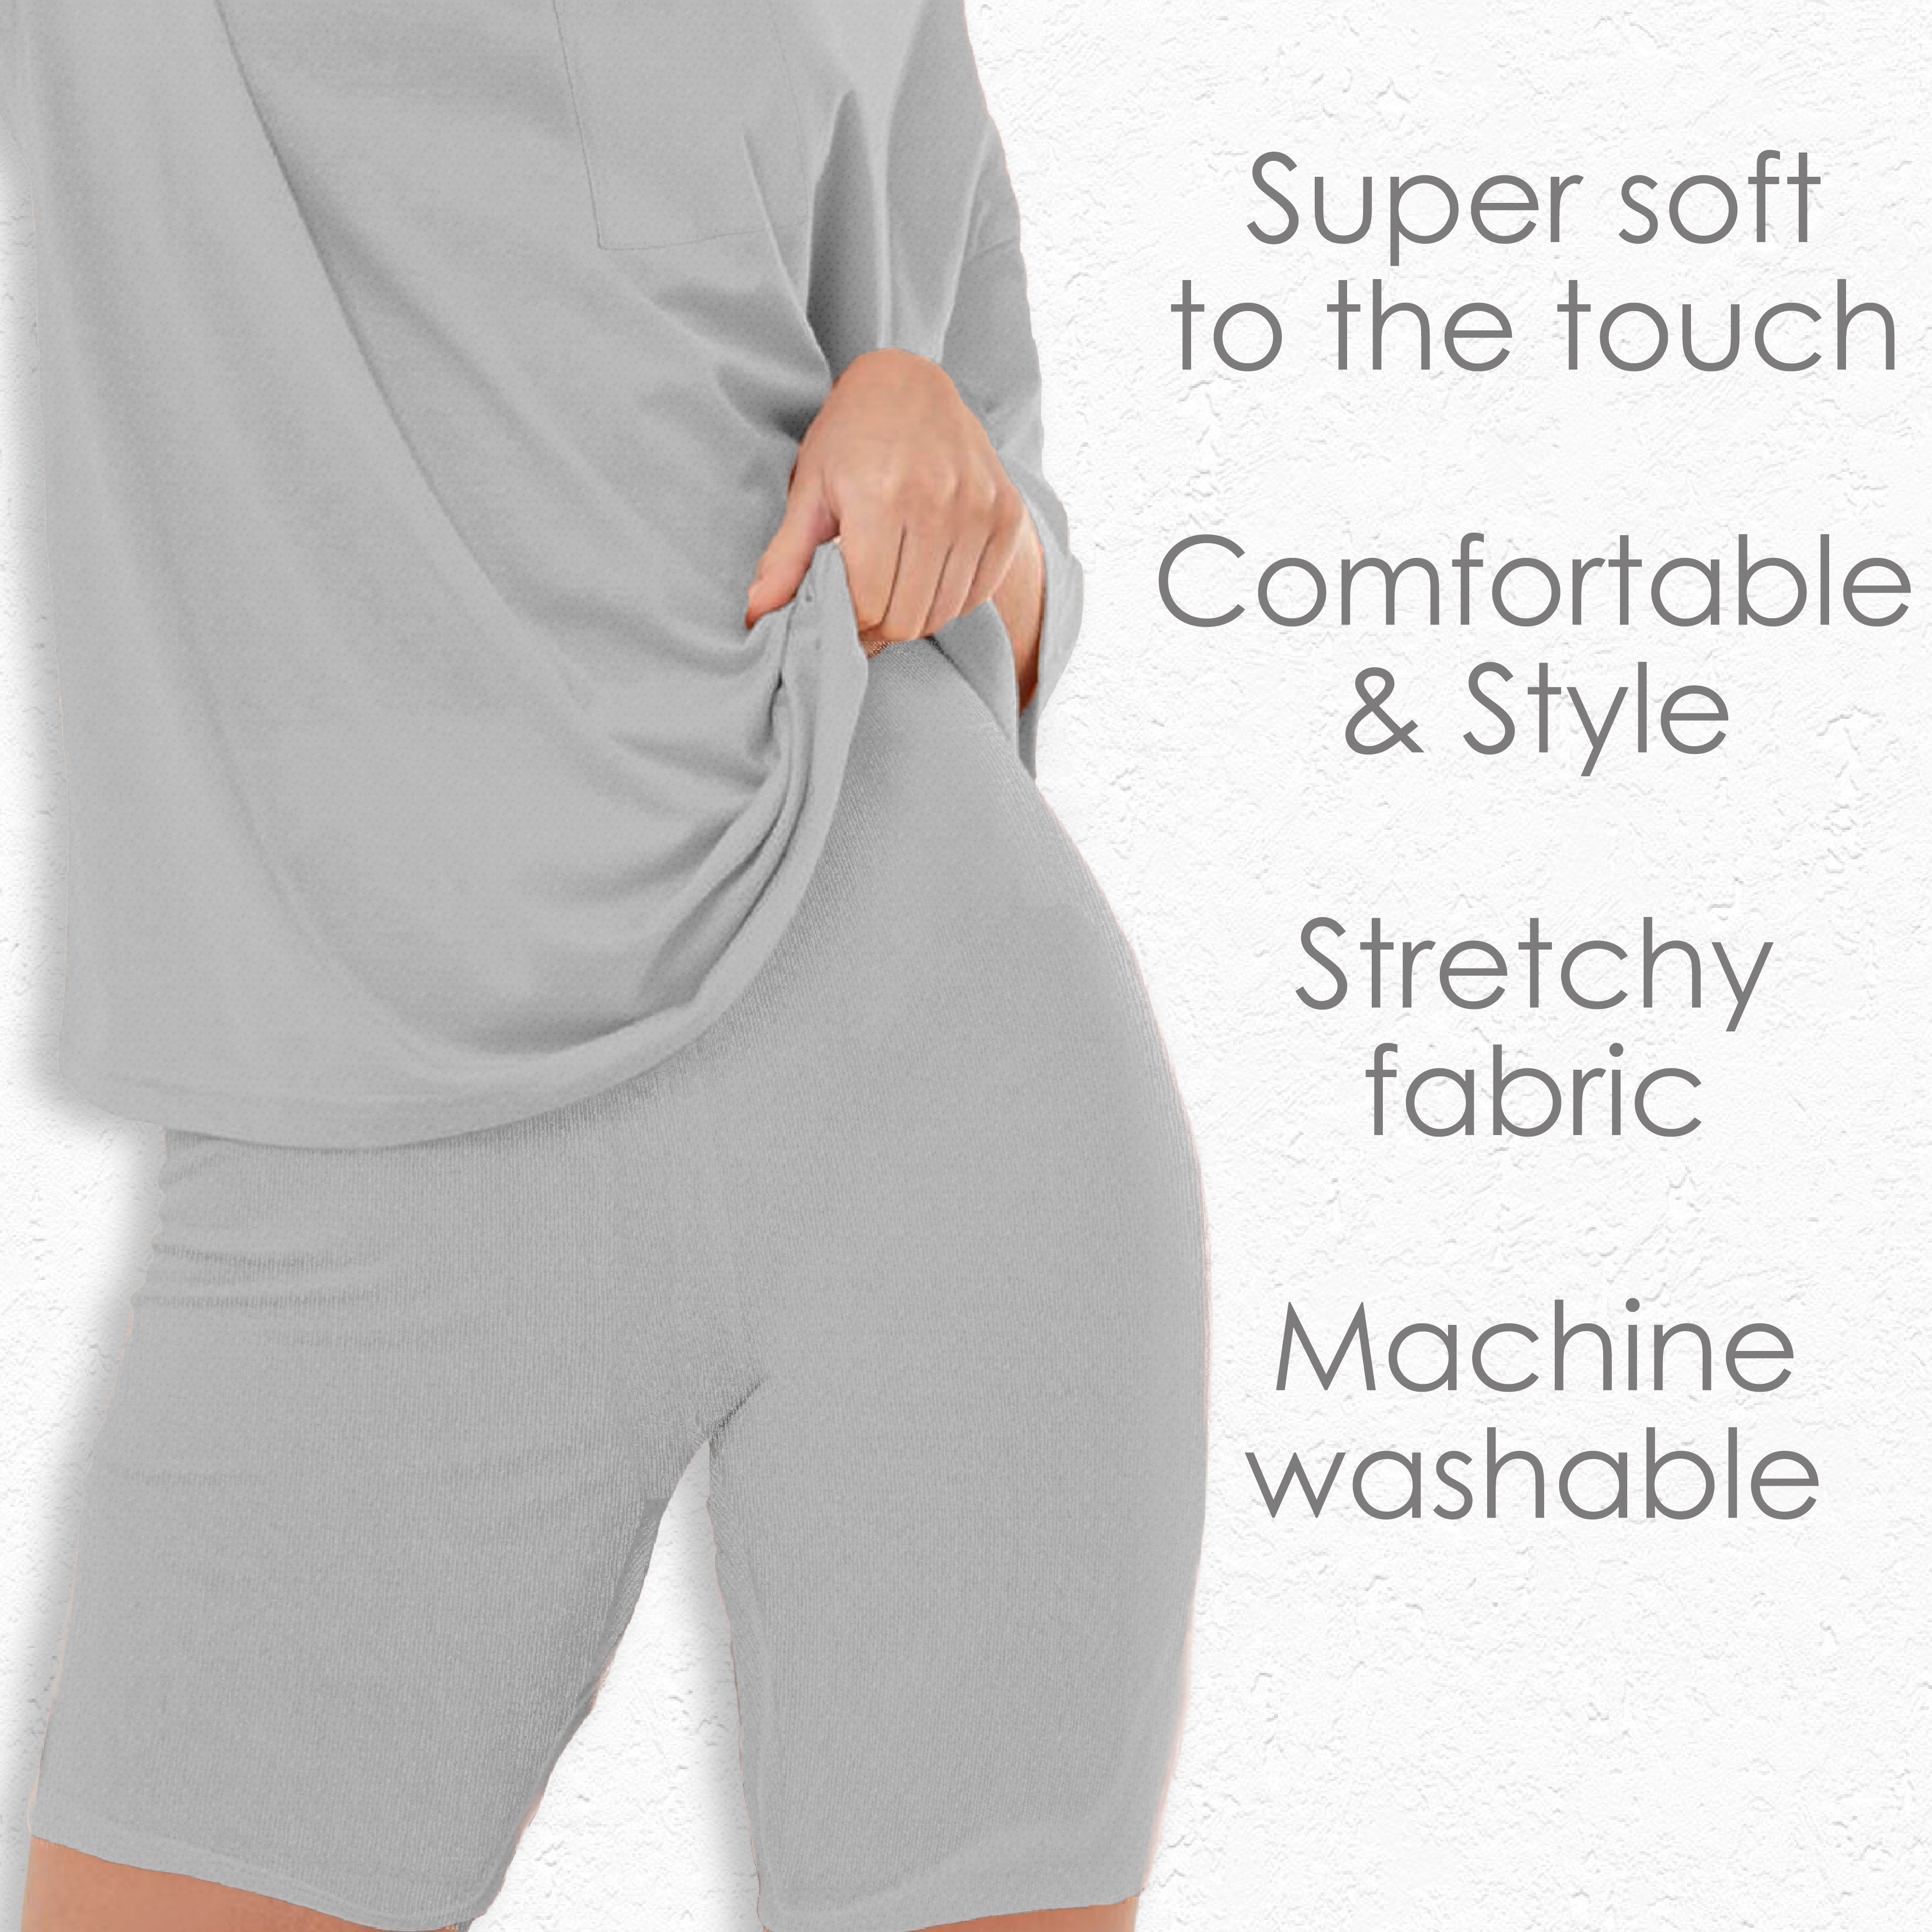 Ladies Activewear Oversized Top T-Shirt Knee Length Shorts Cycling